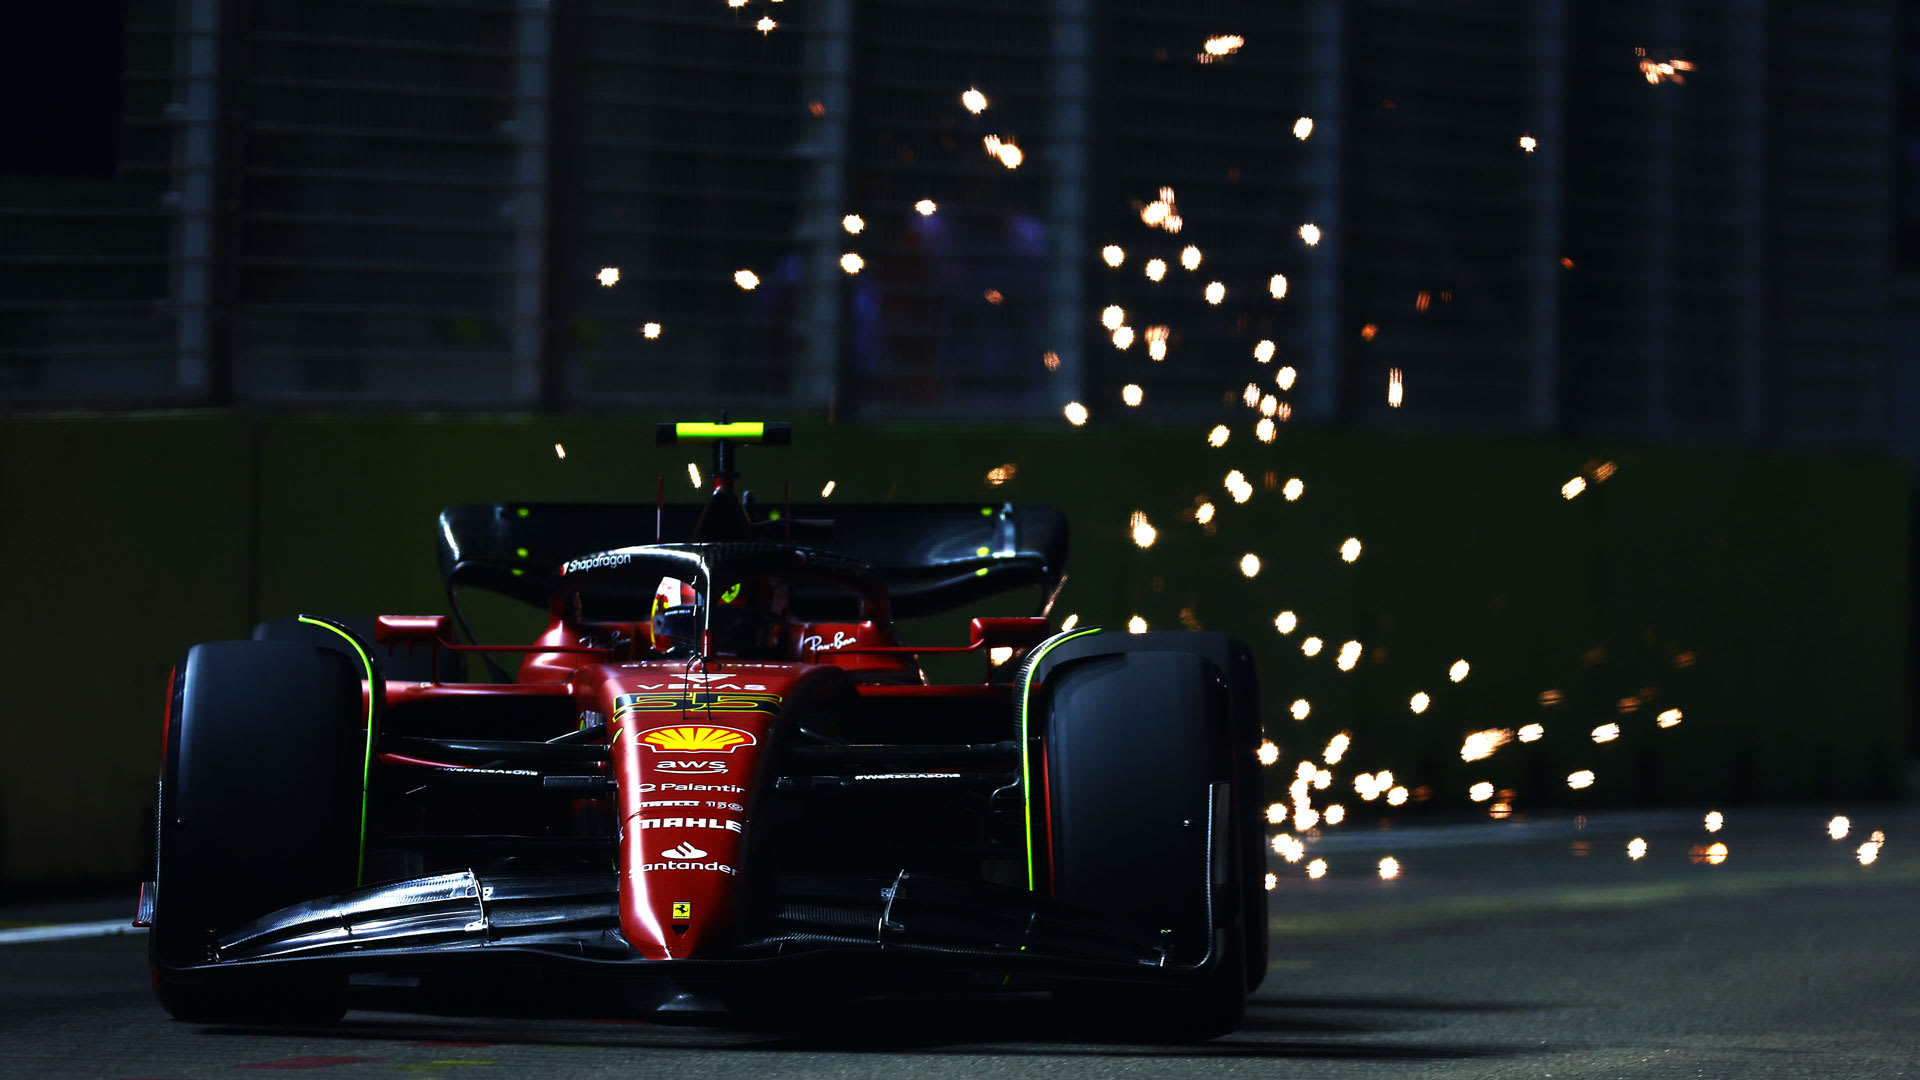 2022 Singapore Grand Prix FP2 report and highlights Sainz leads Leclerc as Ferrari post 1-2 in second practice Formula 1®